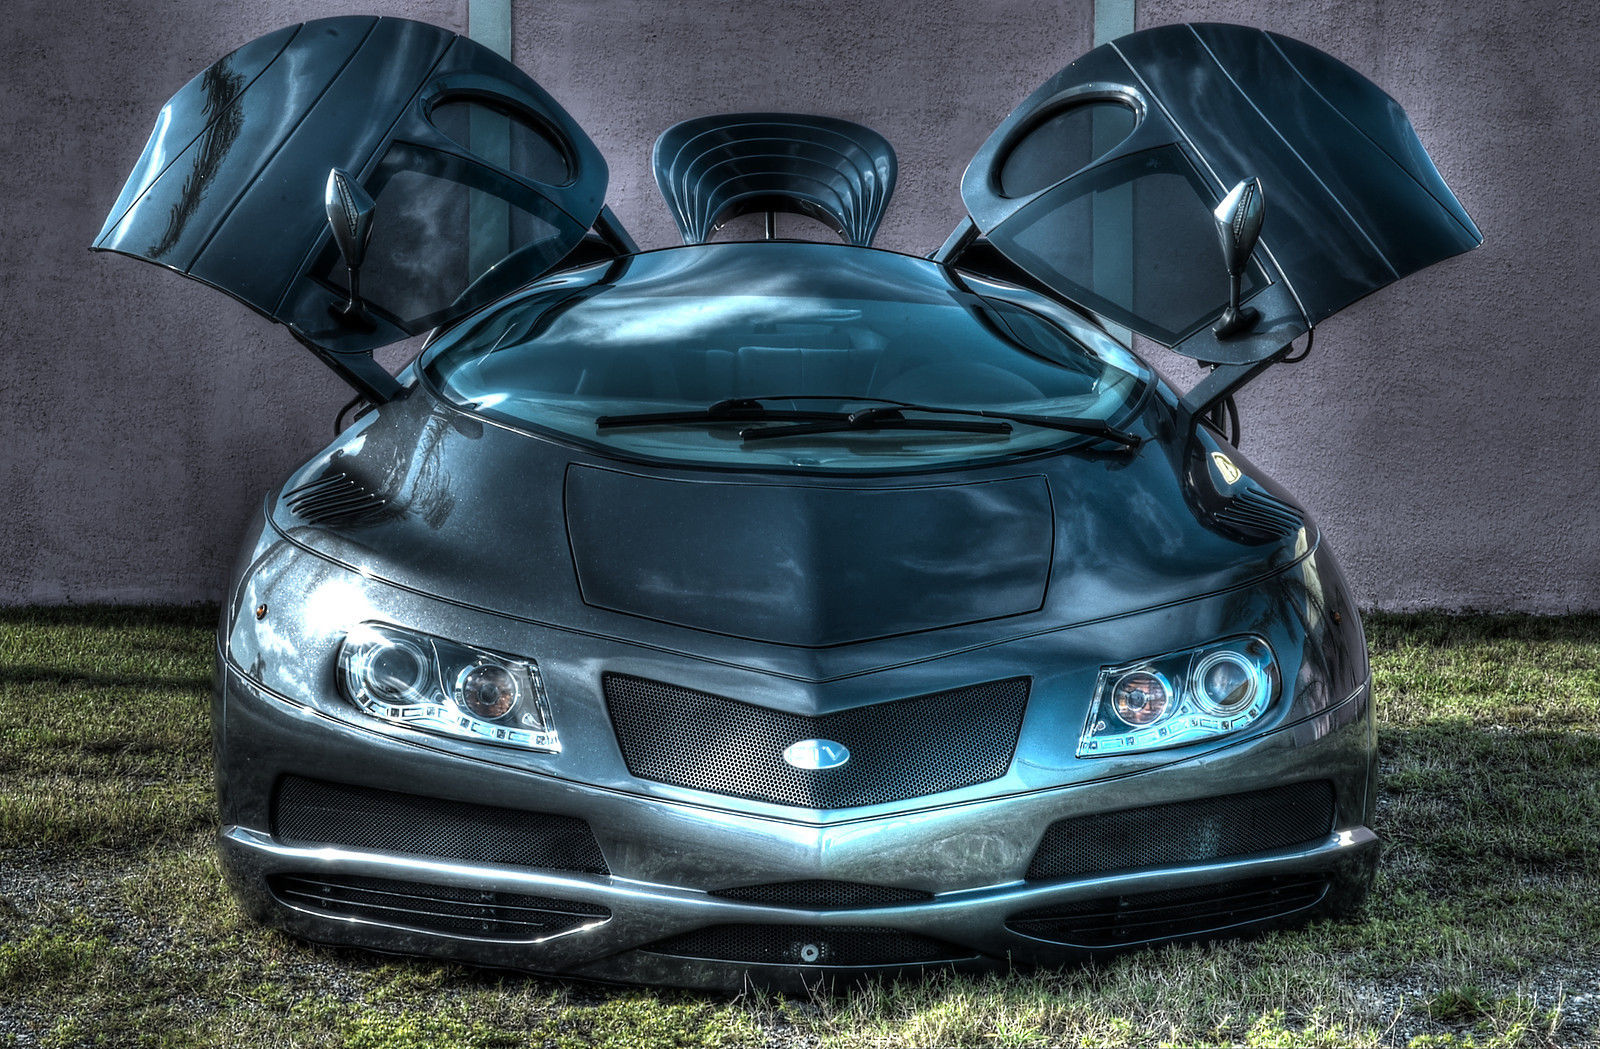 Handmade Science Fiction Alien Car Is For Sale Video Photo Gallery